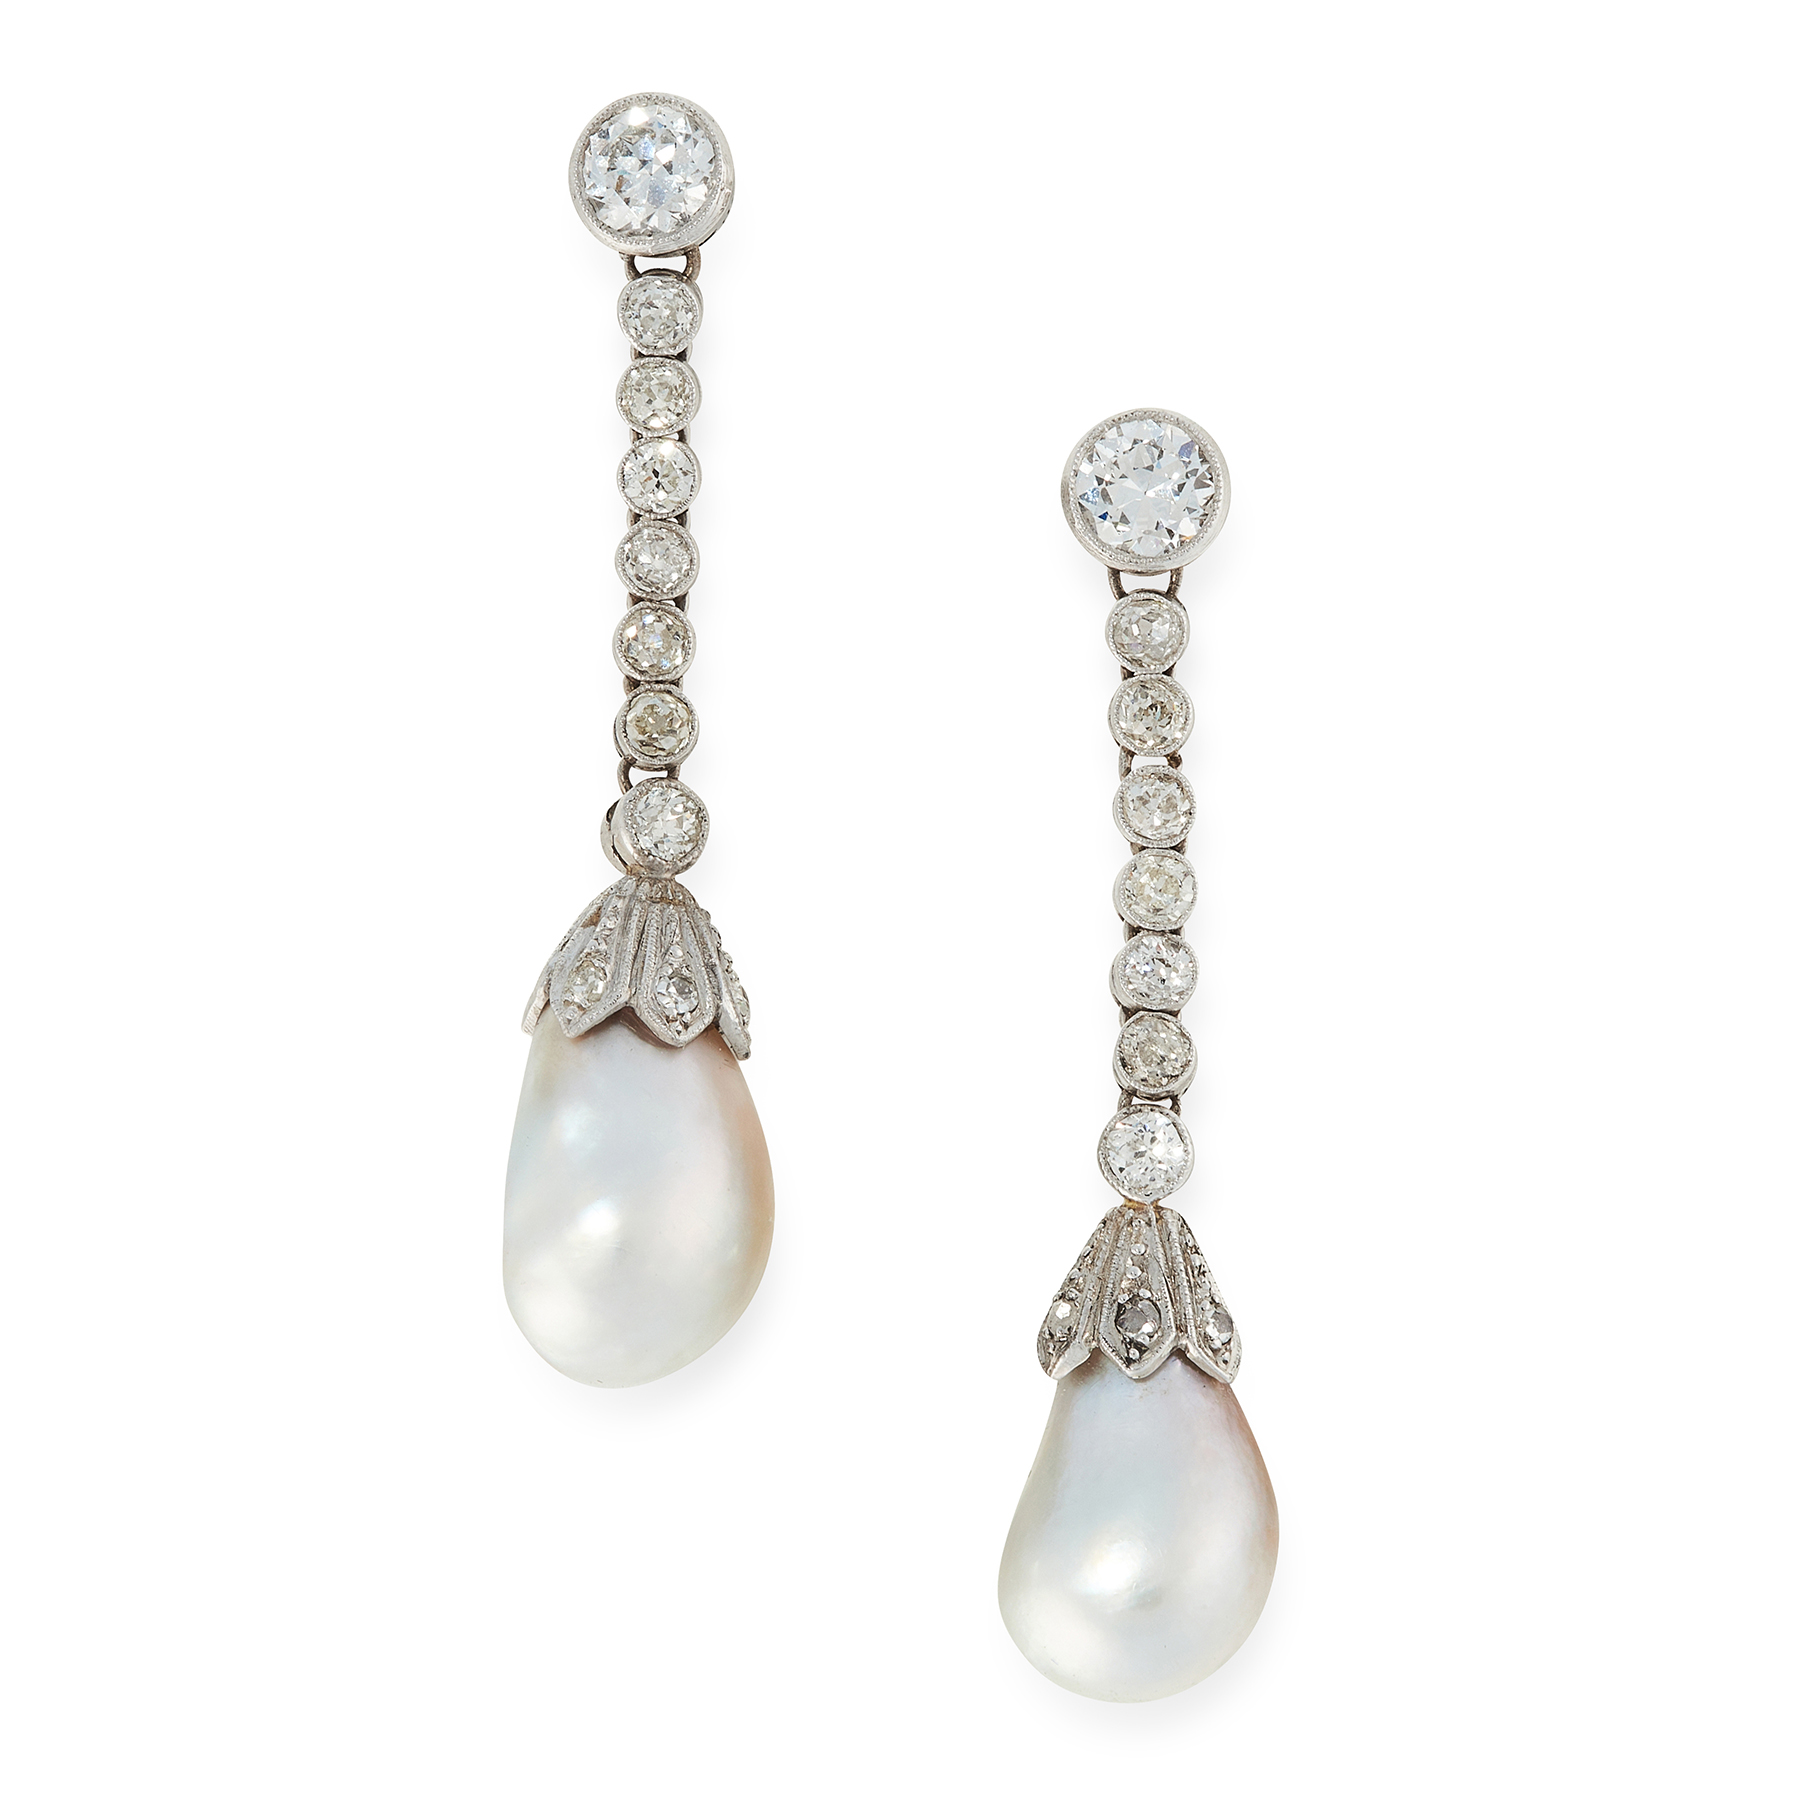 A PAIR OF NATURAL PEARL AND DIAMOND EARRINGS, EARLY 20TH CENTURY in 18ct white gold and platinum, - Image 2 of 2